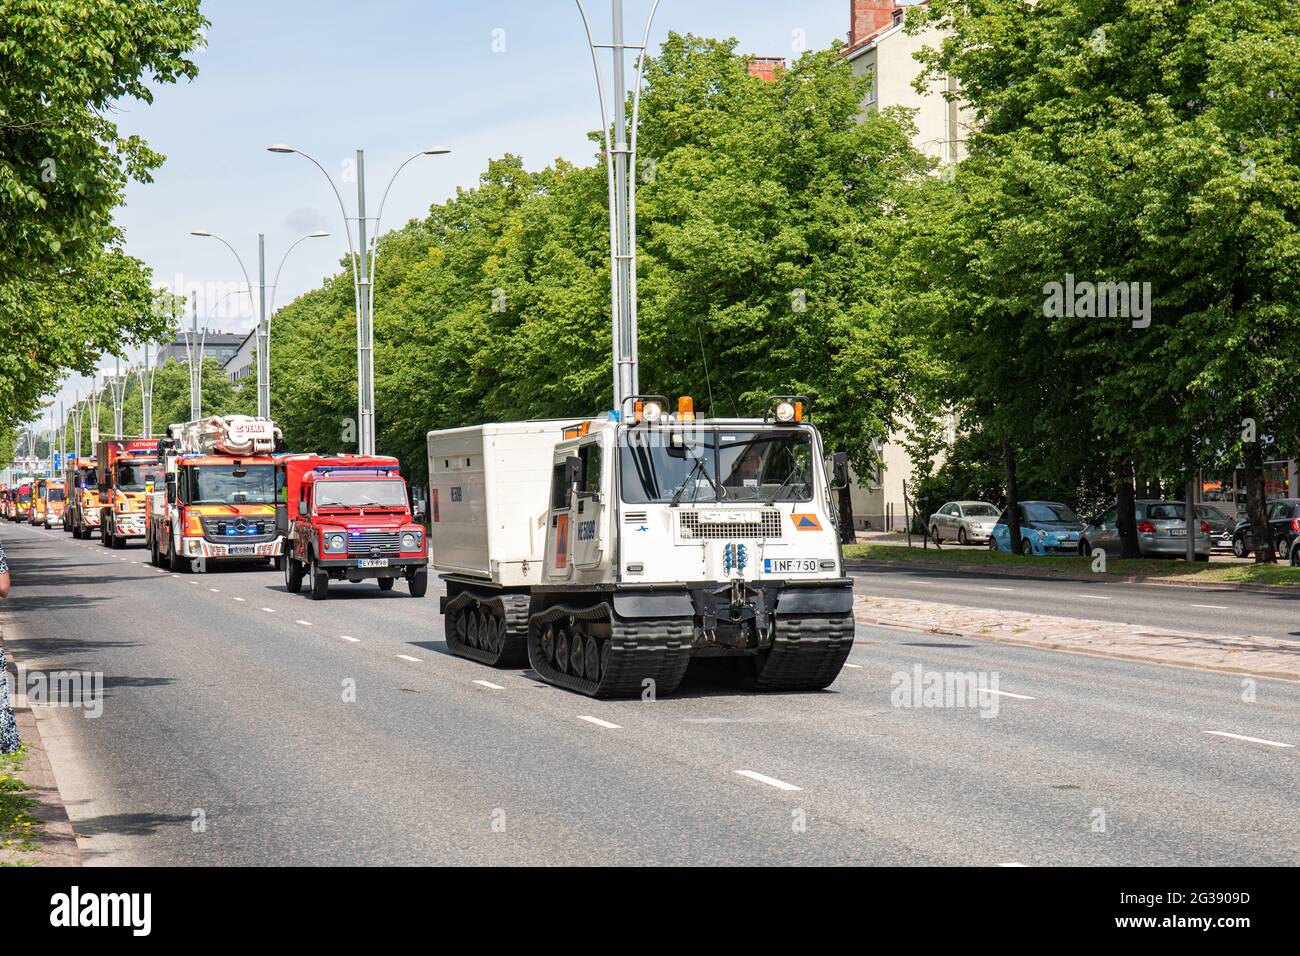 Tracked high-mobility Sisu emergency vehicle at Helsinki City Rescue Department 160th anniversary parade in Munkkiniemi district of Helsinki, Finland Stock Photo